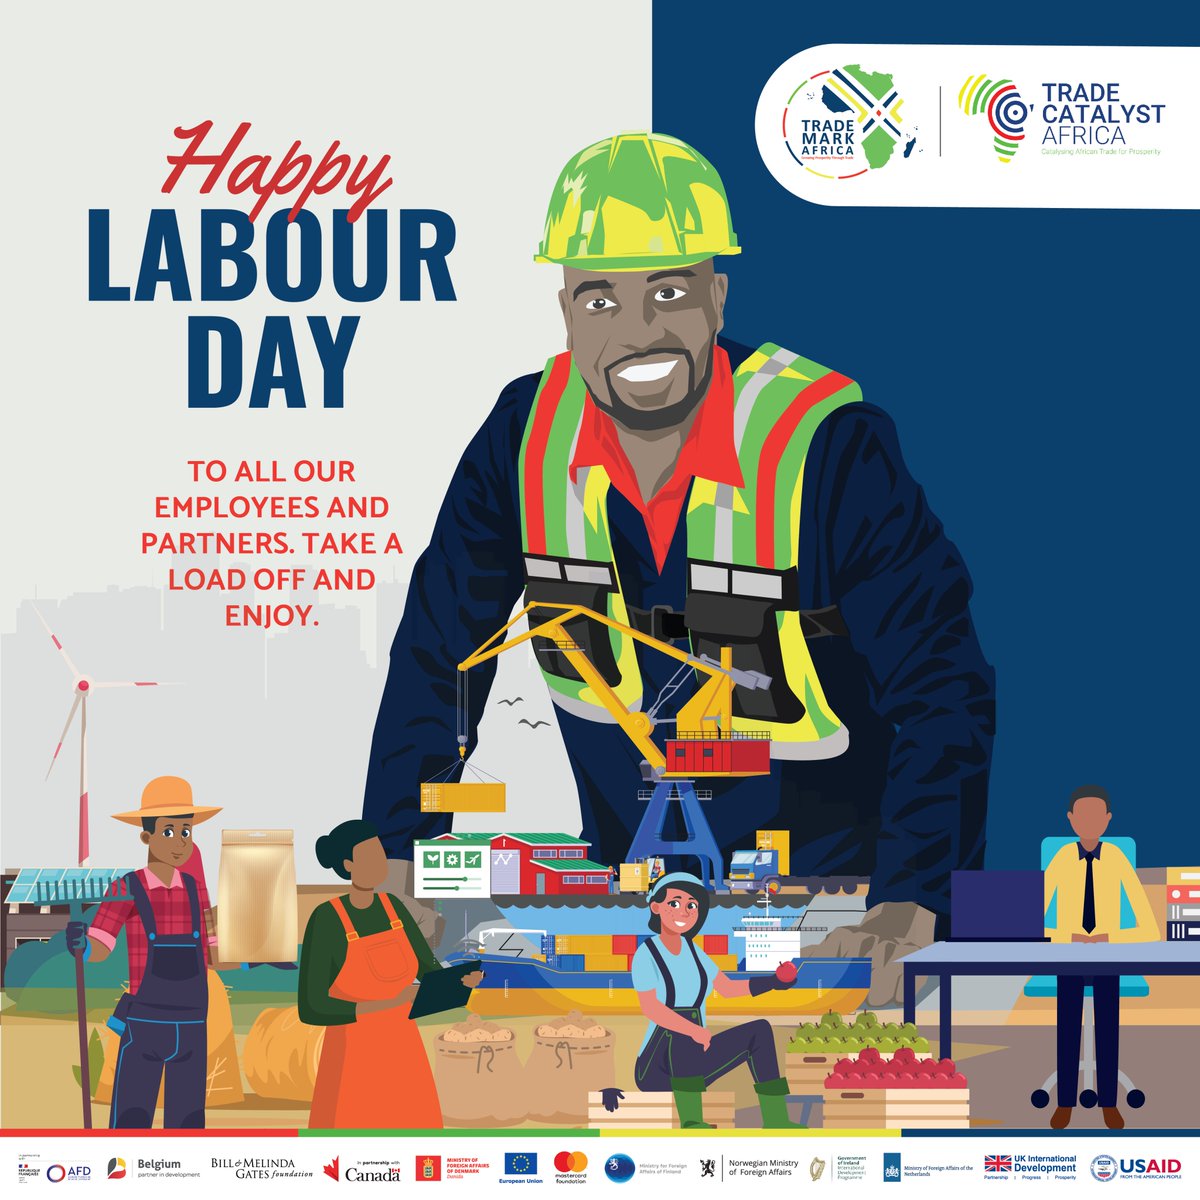 Happy Labour Day. Today, we celebrate the dedication and hard work of every individual contributing to building a brighter future. Your efforts are the driving force behind our mission for inclusive and sustainable trade across Africa.🌍 #LabourDay #TradeforProgress